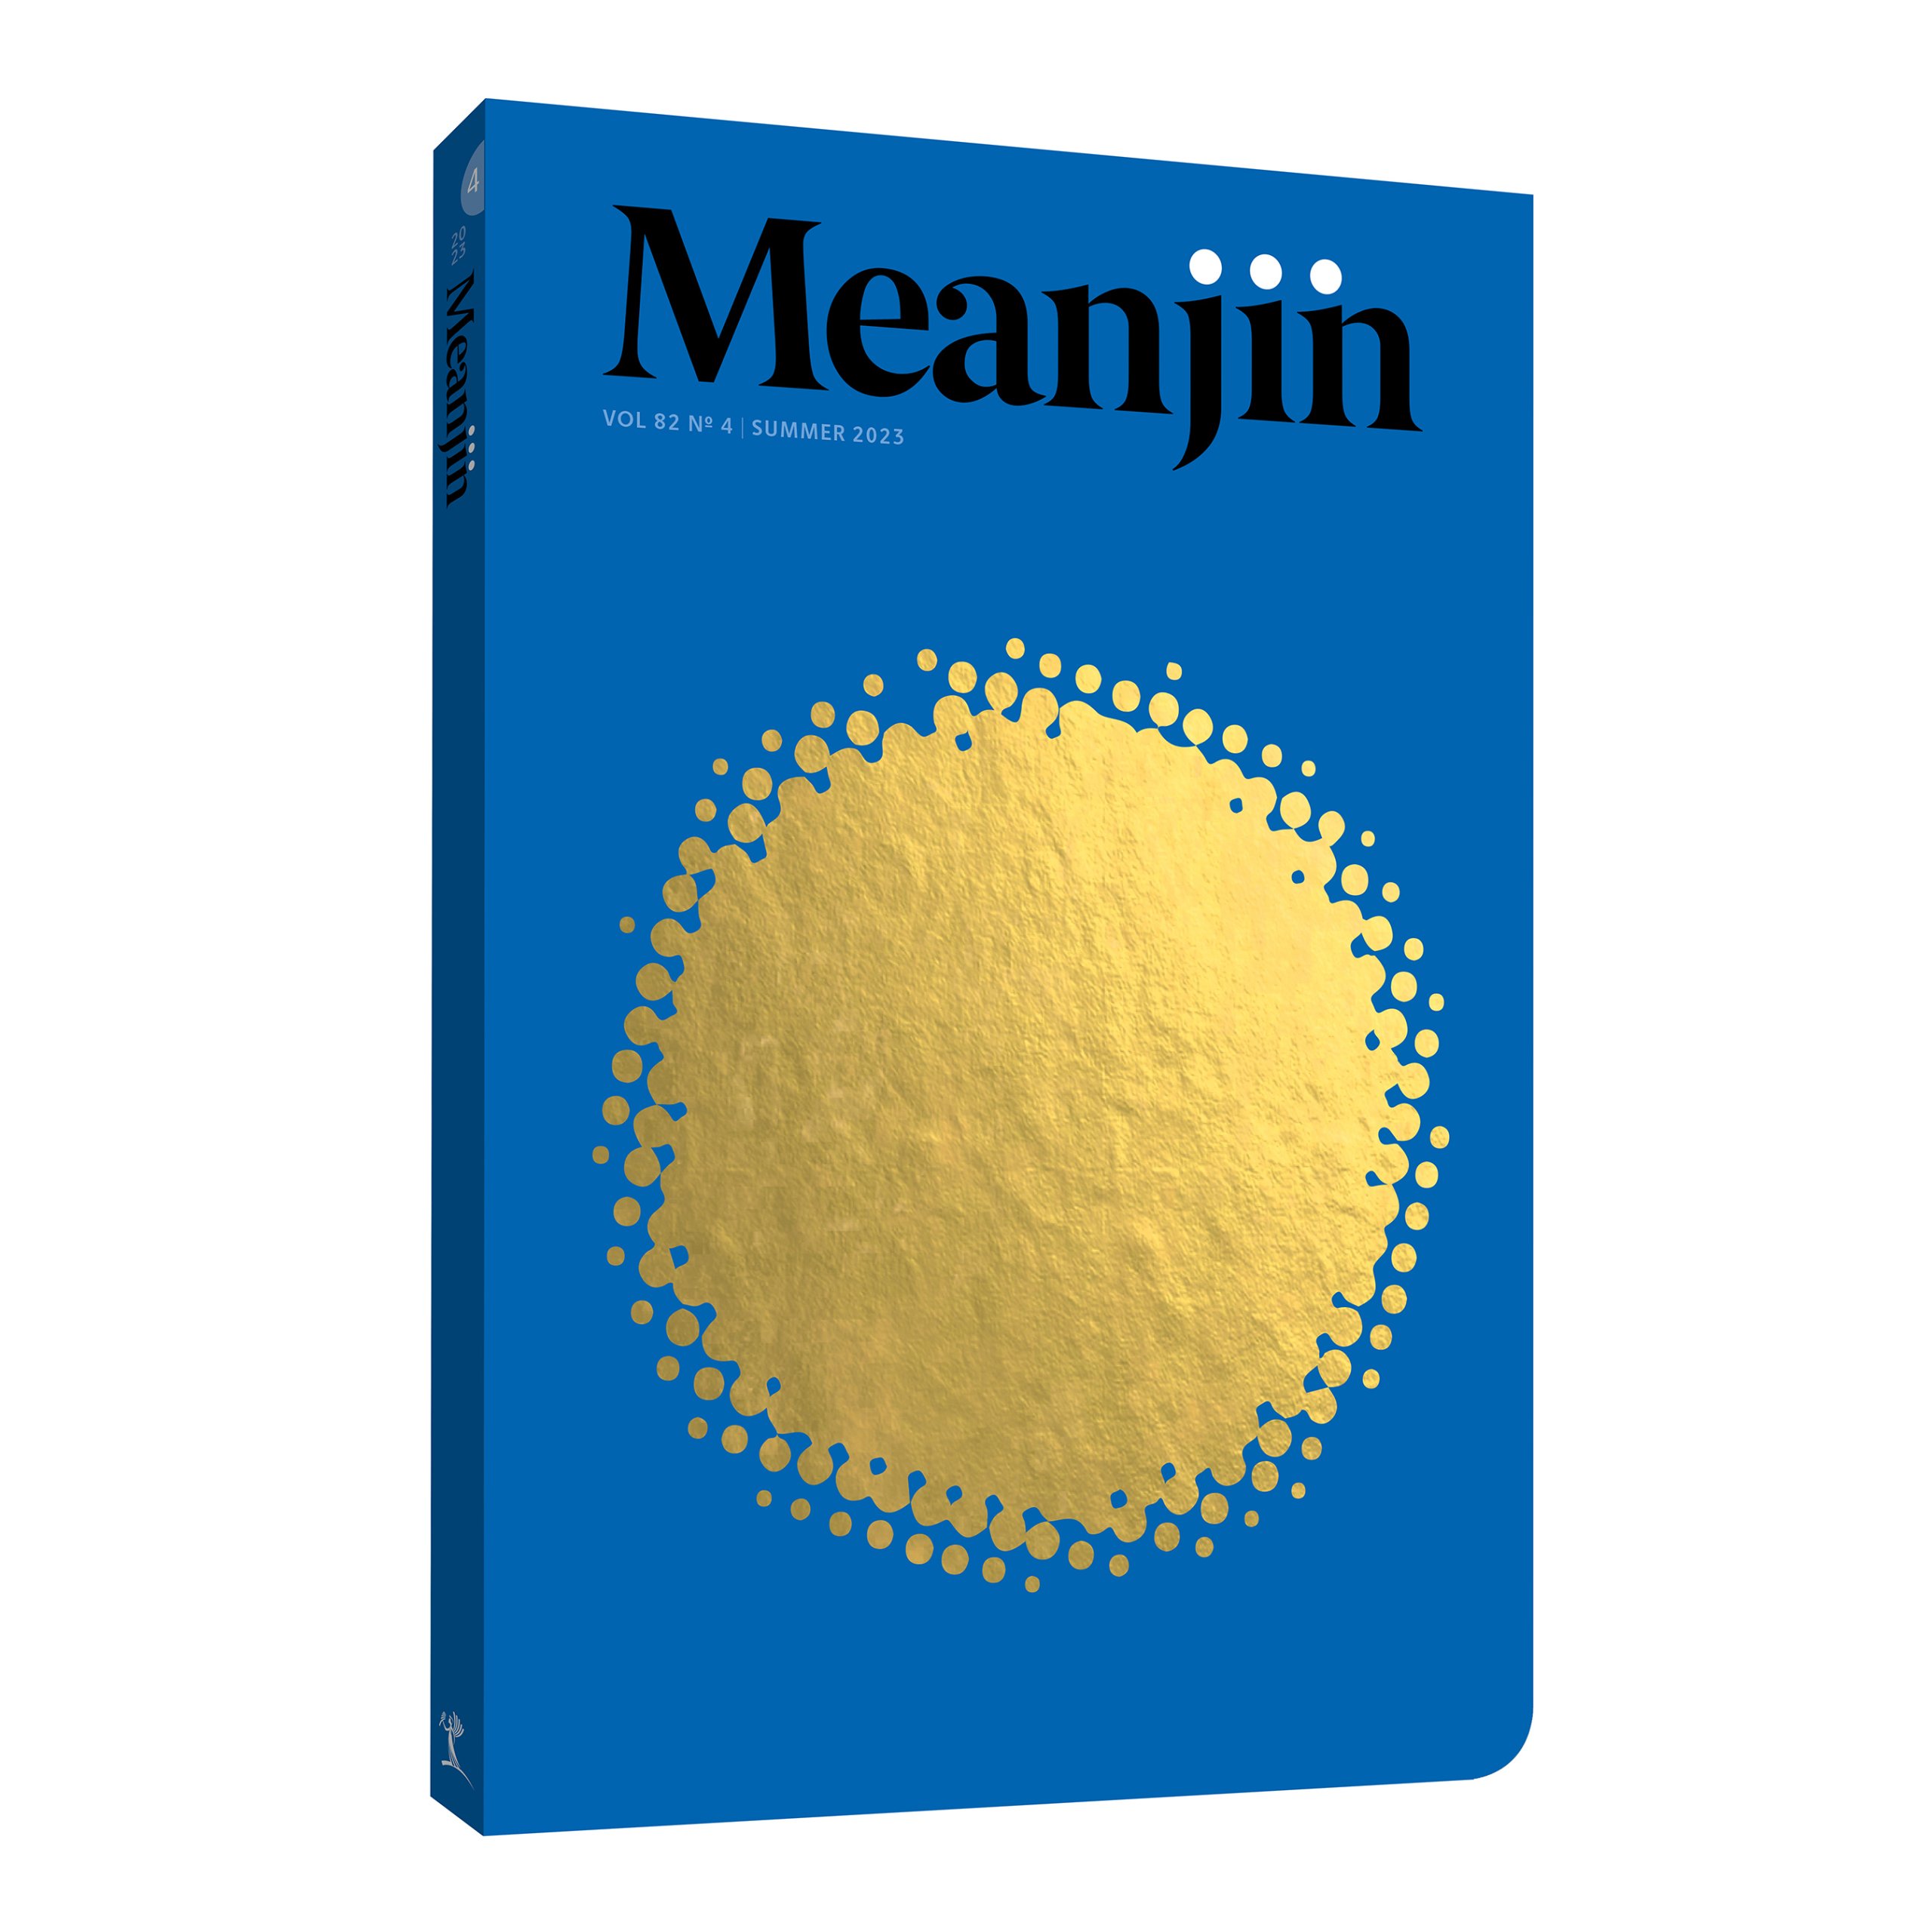 Meanjin_82.4_3D_square-scaled